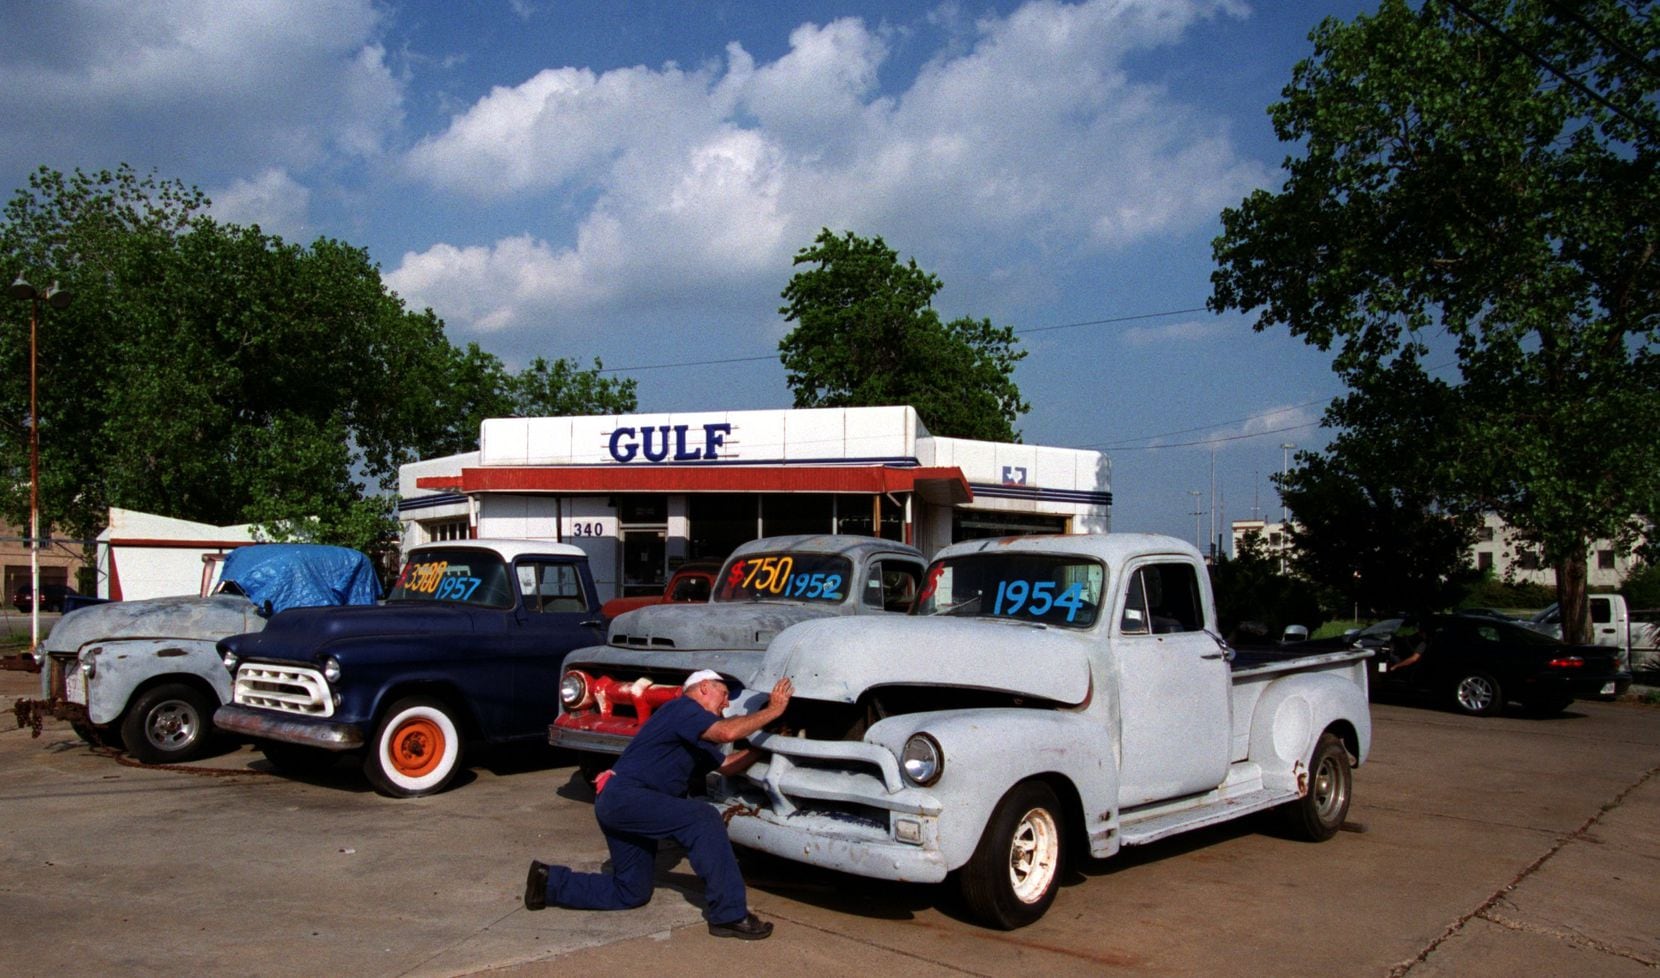 Riegel Gulf Service in Deep Ellum, which closed in 2002, will become a bar called Thunderbird Station in 2020. Its co-owners plan to keep "the character of the business," says Kim Finch, meaning that it will continue to look like a service station from the '50s. (DMN file photo)